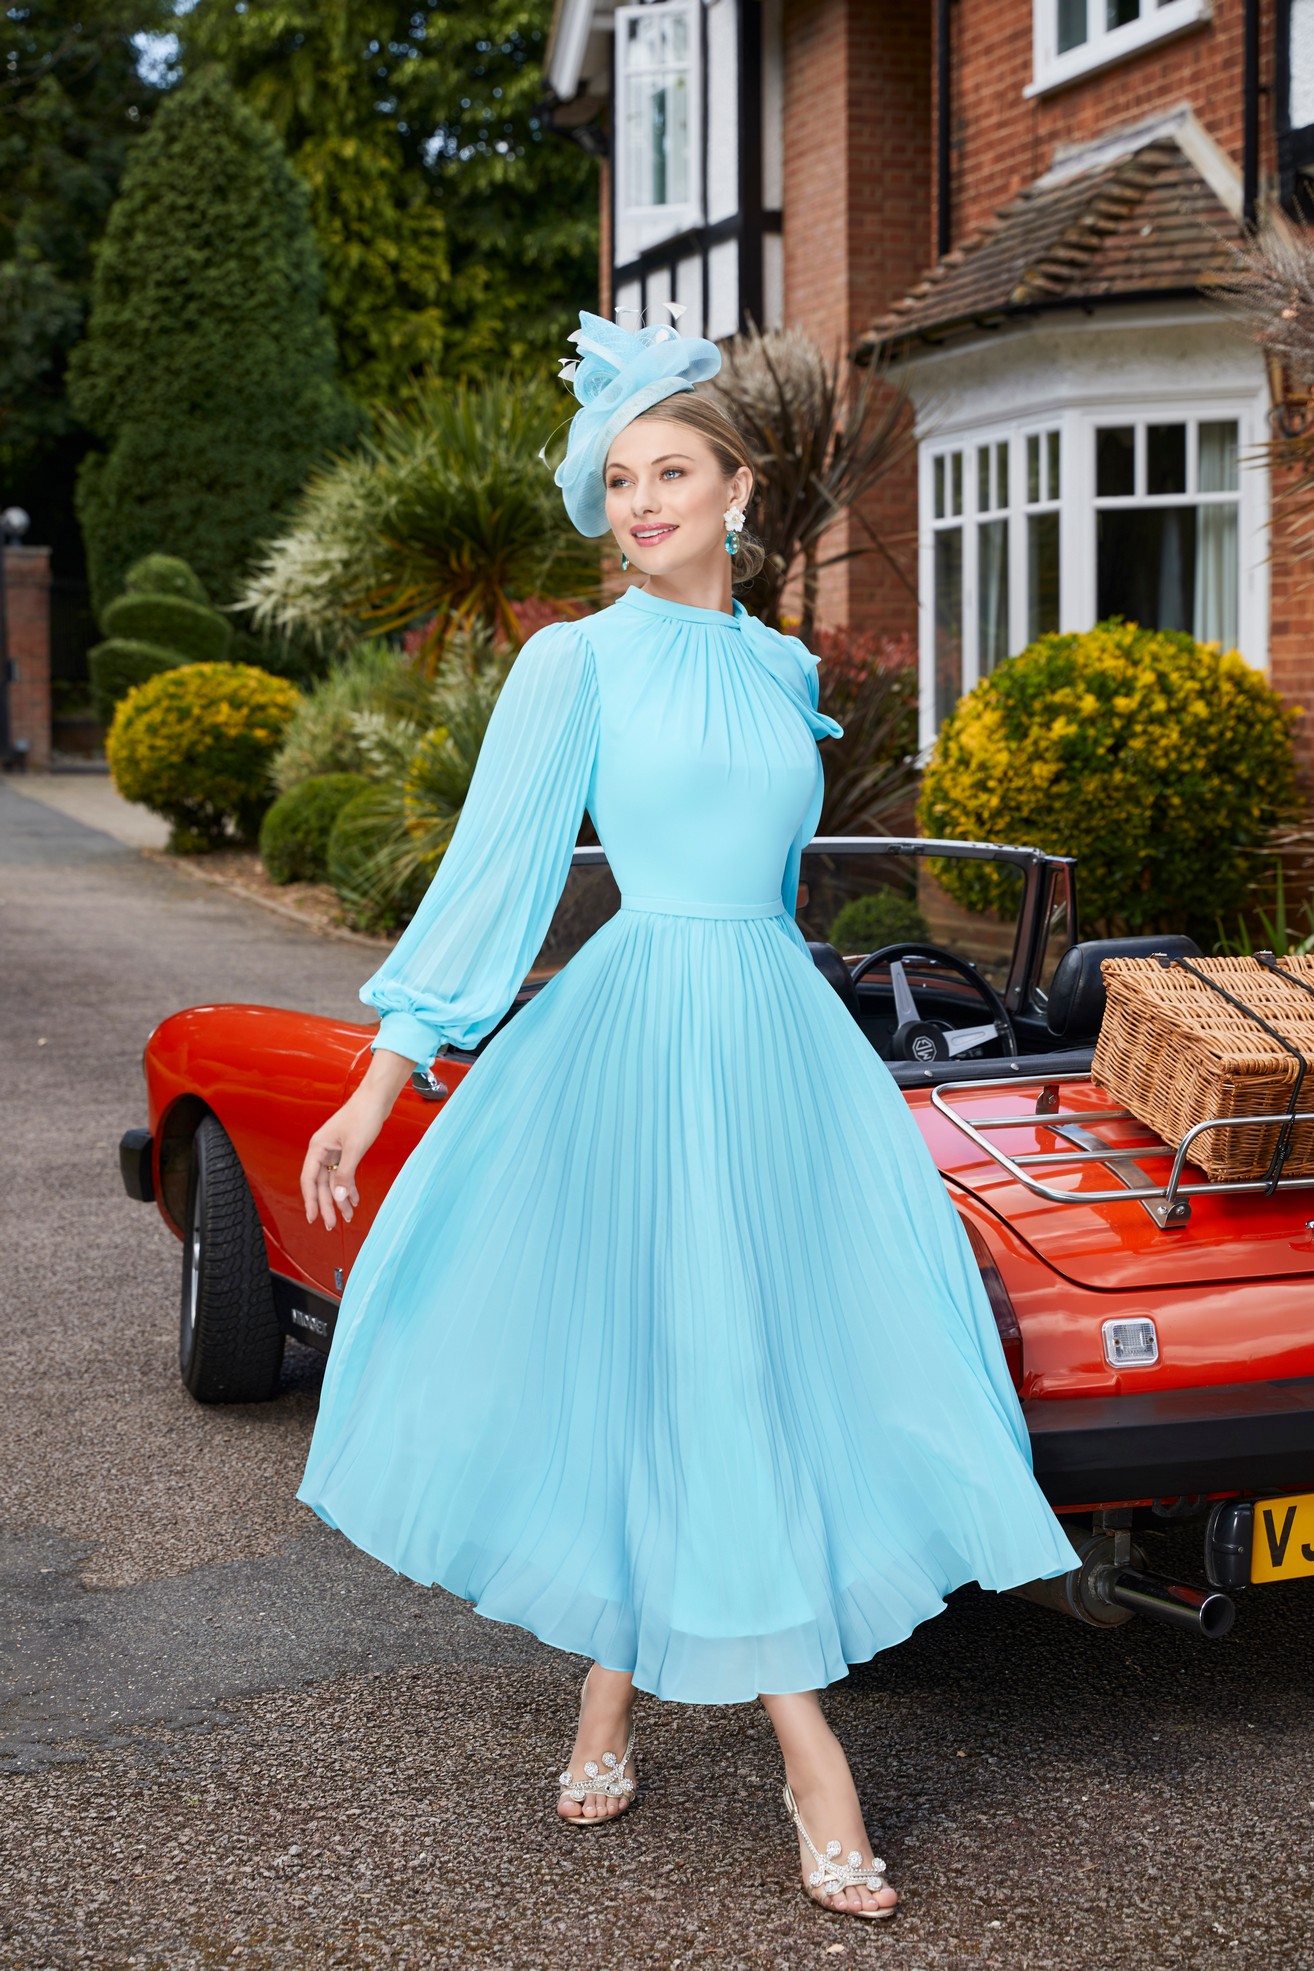 Blonde lady standing outside house next to vintage car wearing occasion a-line dress with high neck and long sleeves with sparkle heeled shoes and matching fascinator hat 